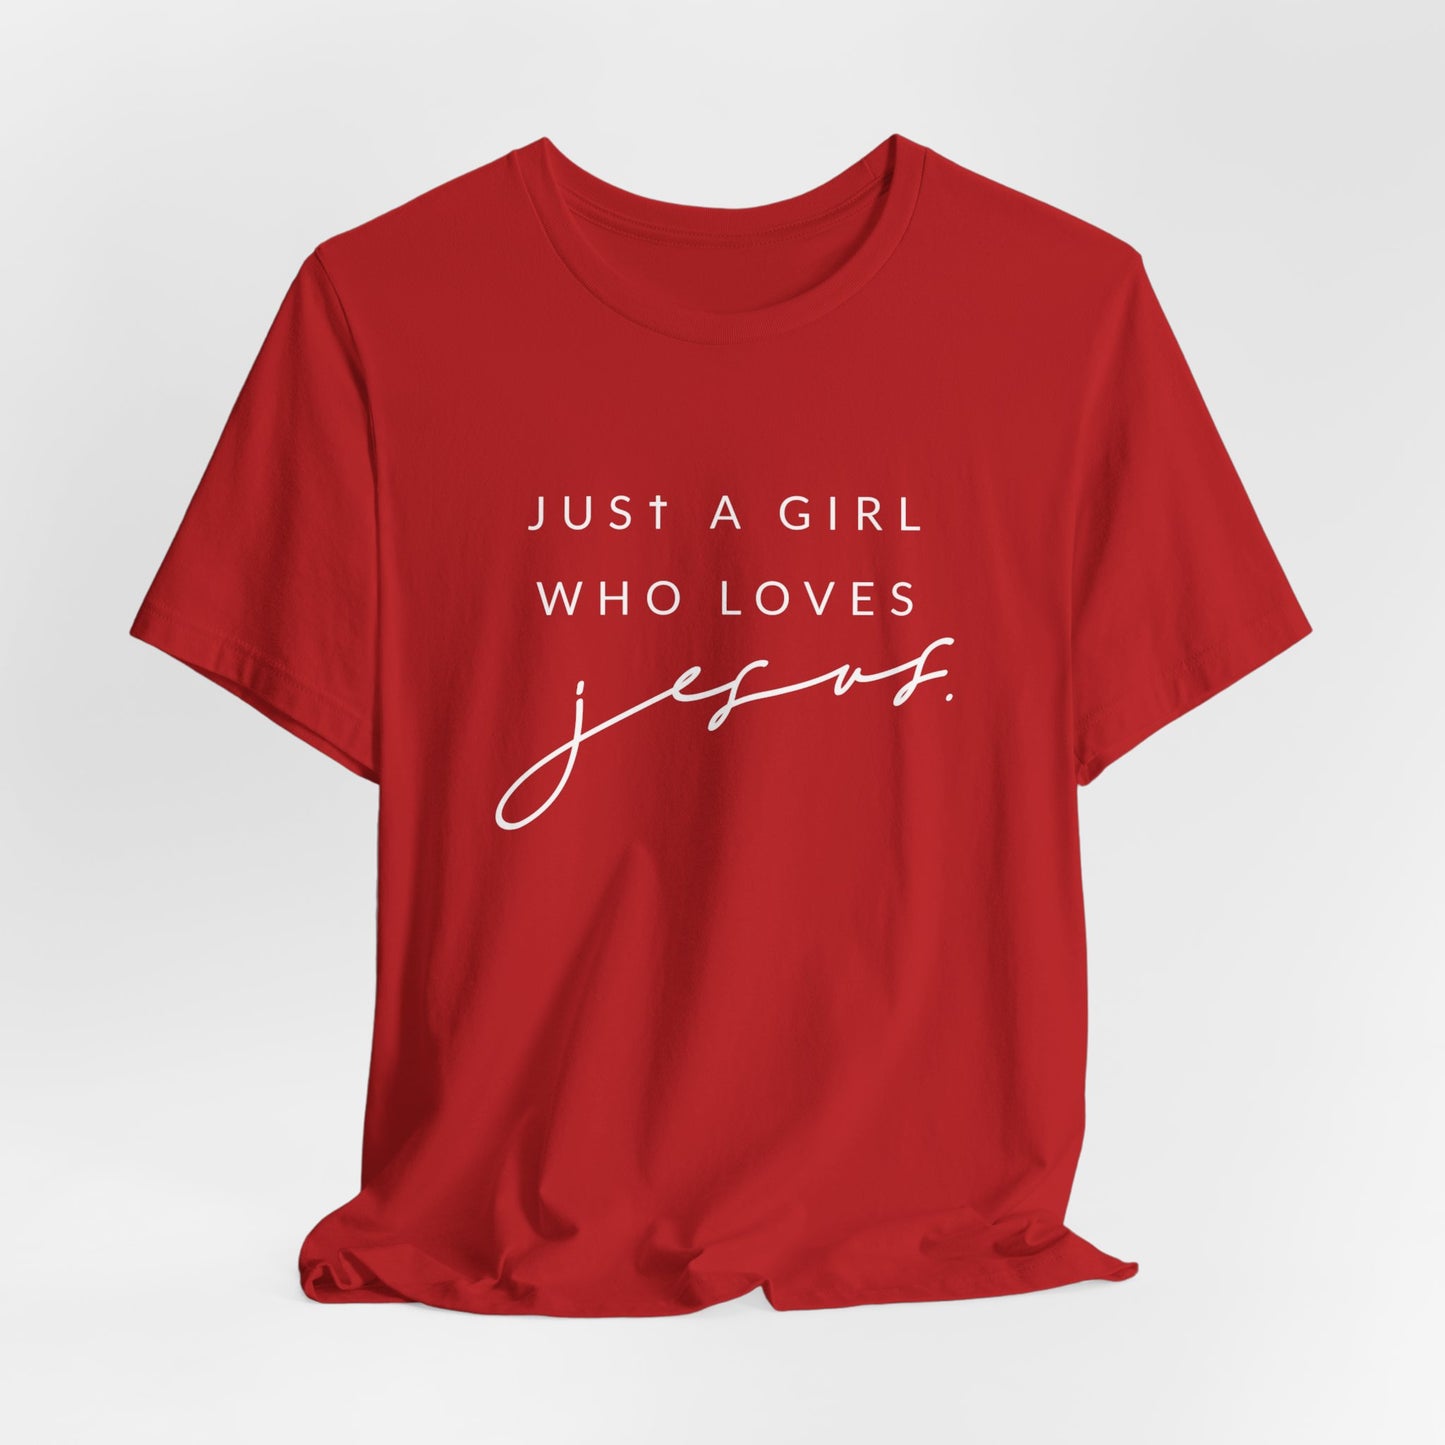 Just A Girl Who Loves Jesus Tee